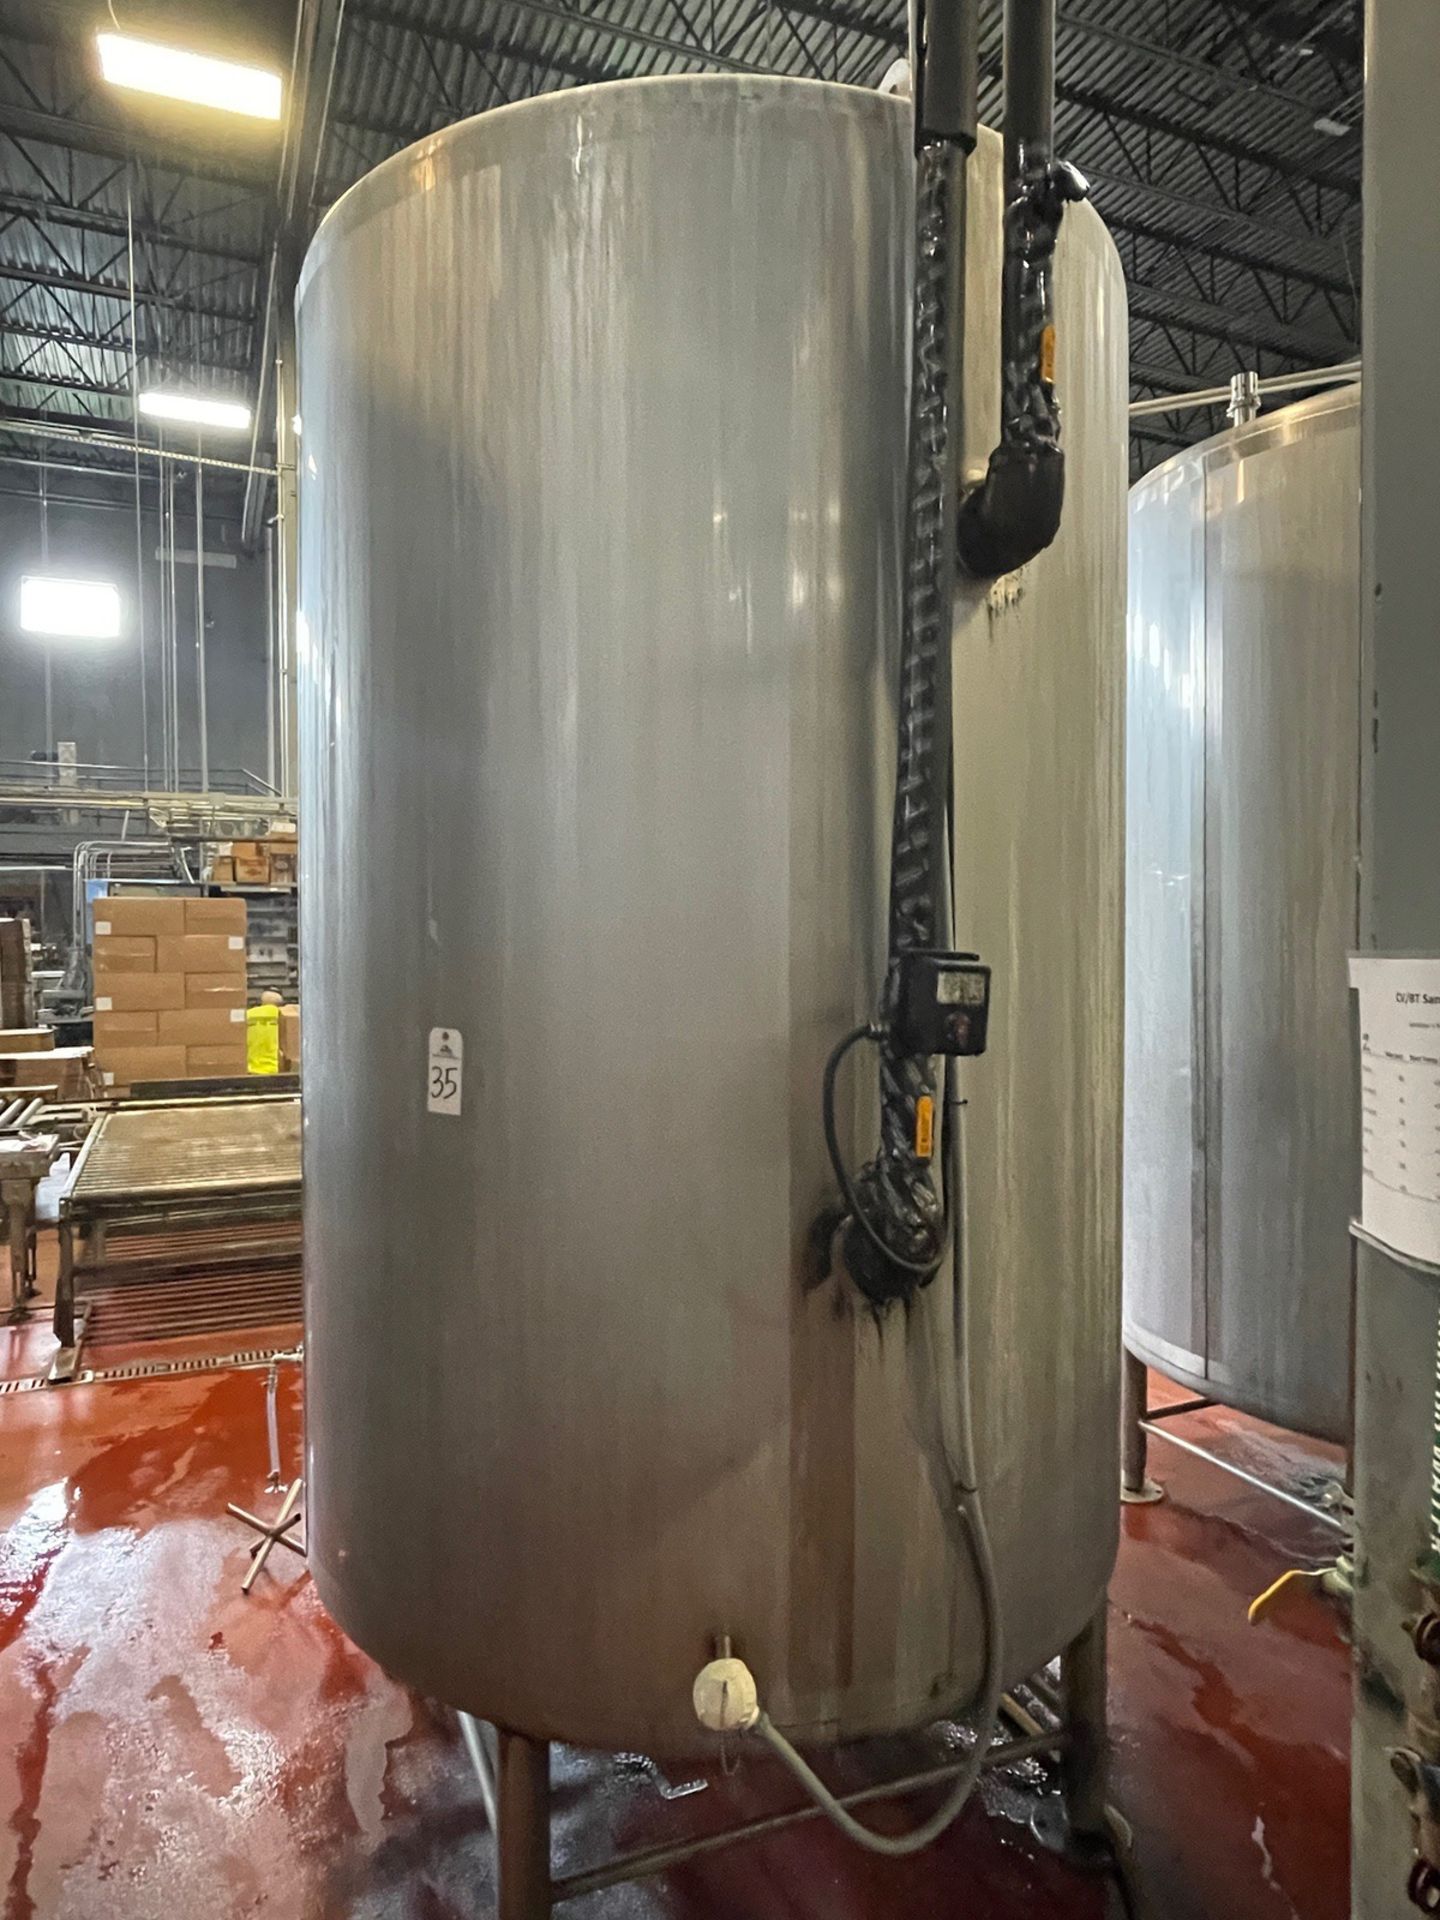 2007 Sprinkman 1250 Gal Stainless Steel Brite Tank, Glycol Jacketed, Rounded Bottom | Rig Fee $1500 - Image 9 of 9